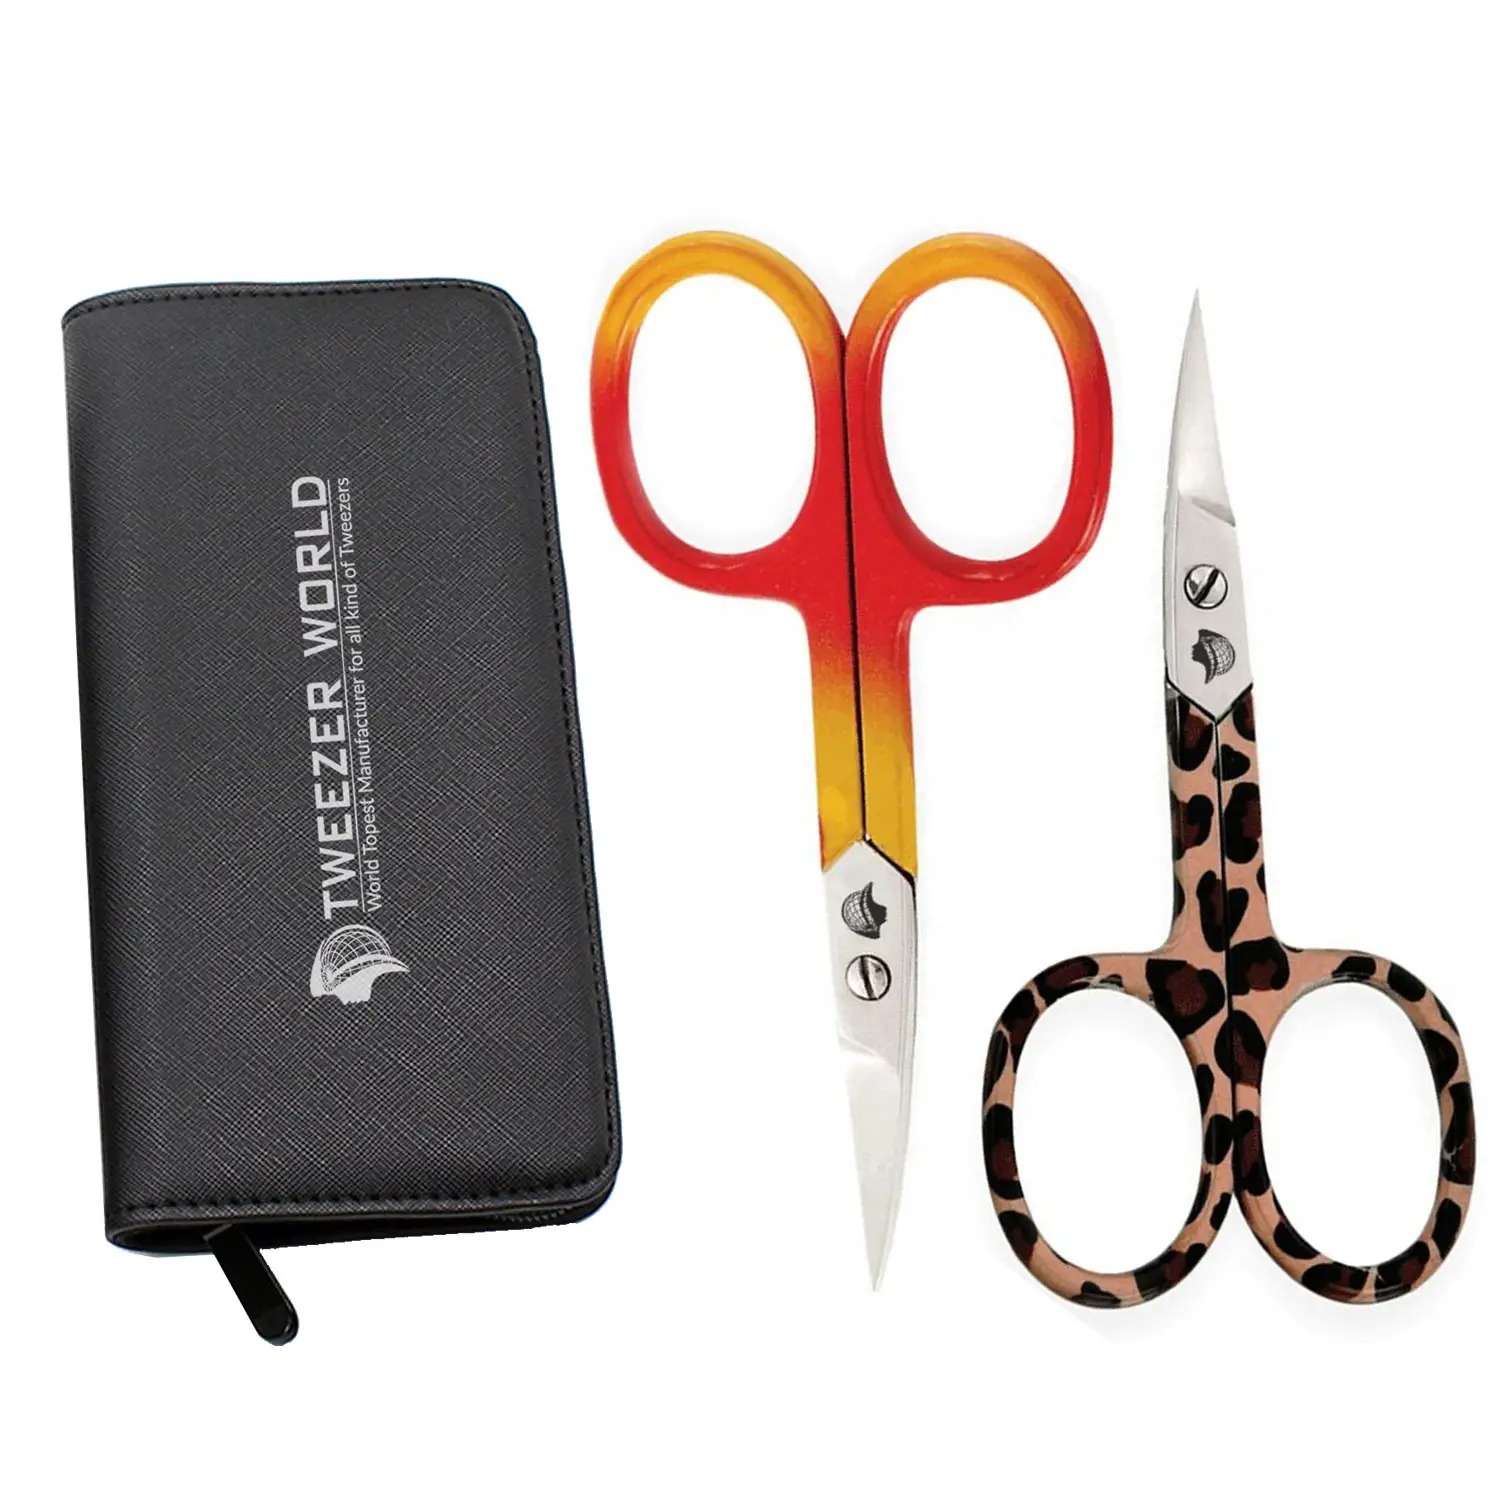 Best Amazon Hot Sell 2 pcs set Nail Scissors different color Stainless Steel Multi functional Cuticle Scissors Manicure Scissors